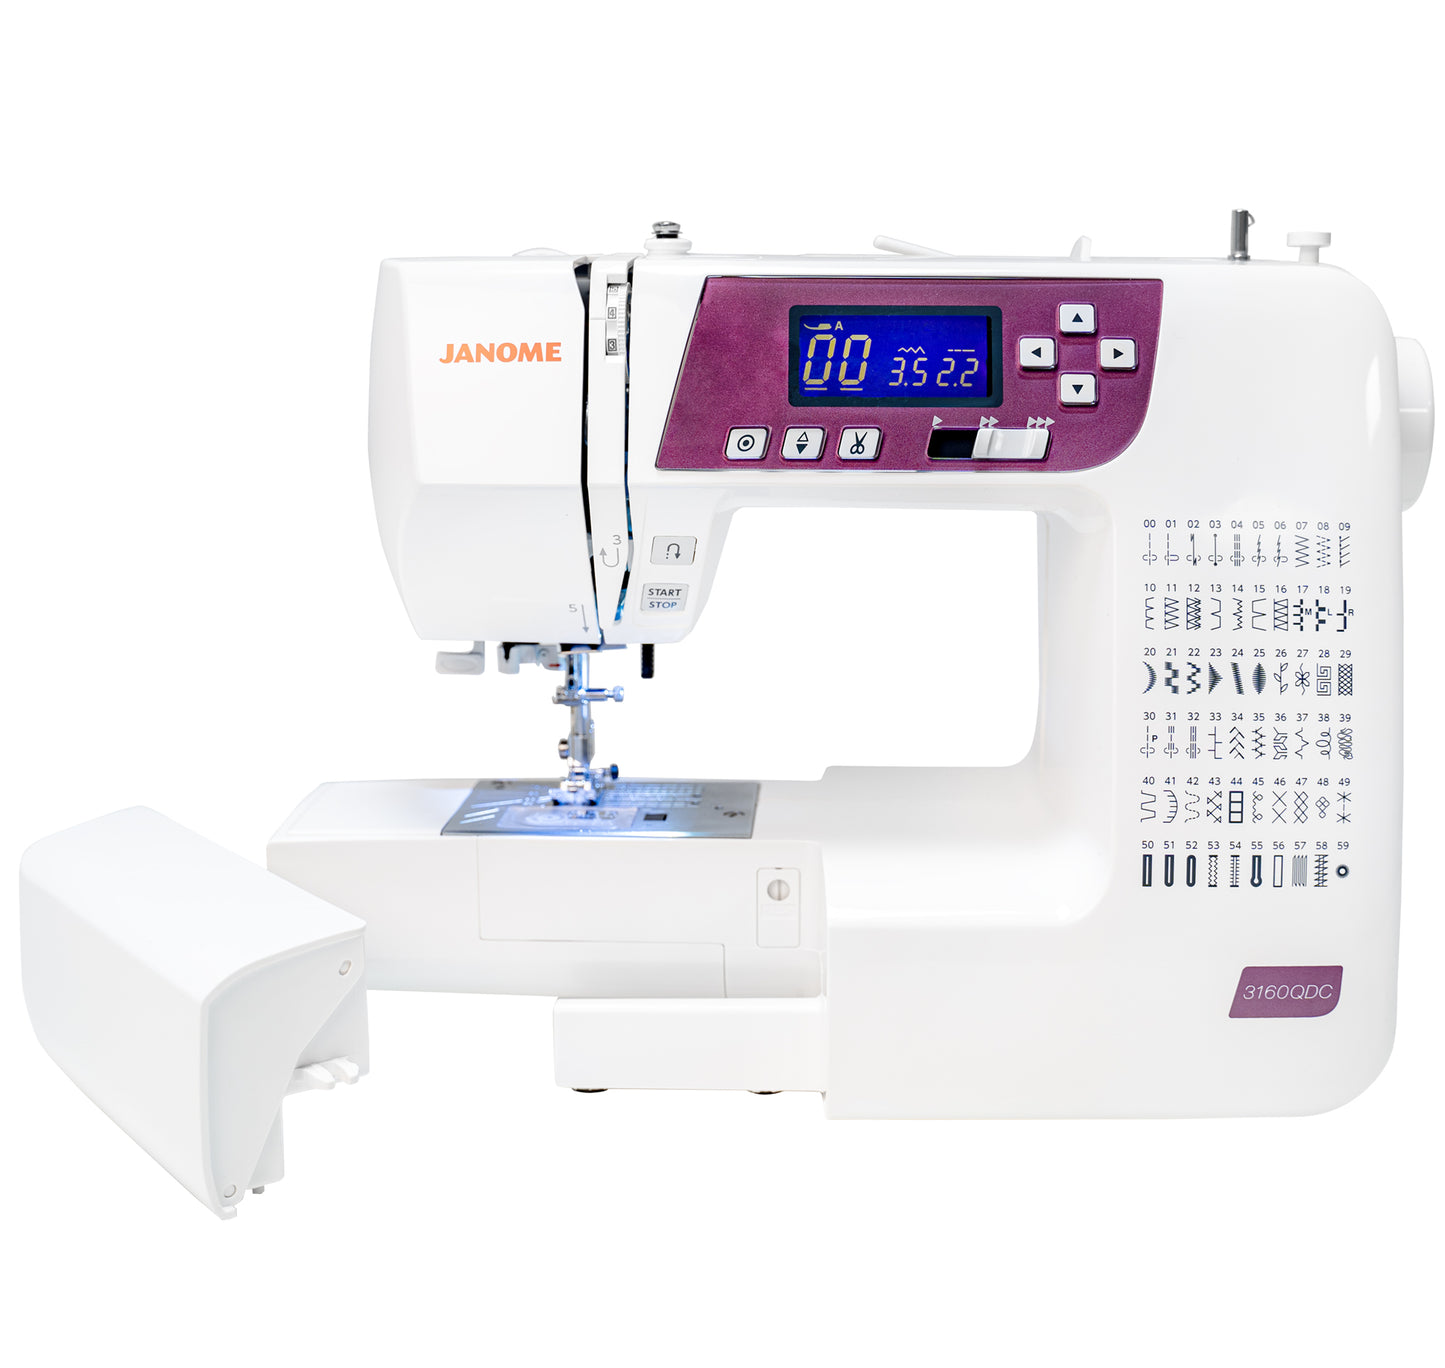 Janome 3160QDC-G Computerized Sewing & Quilting Machine